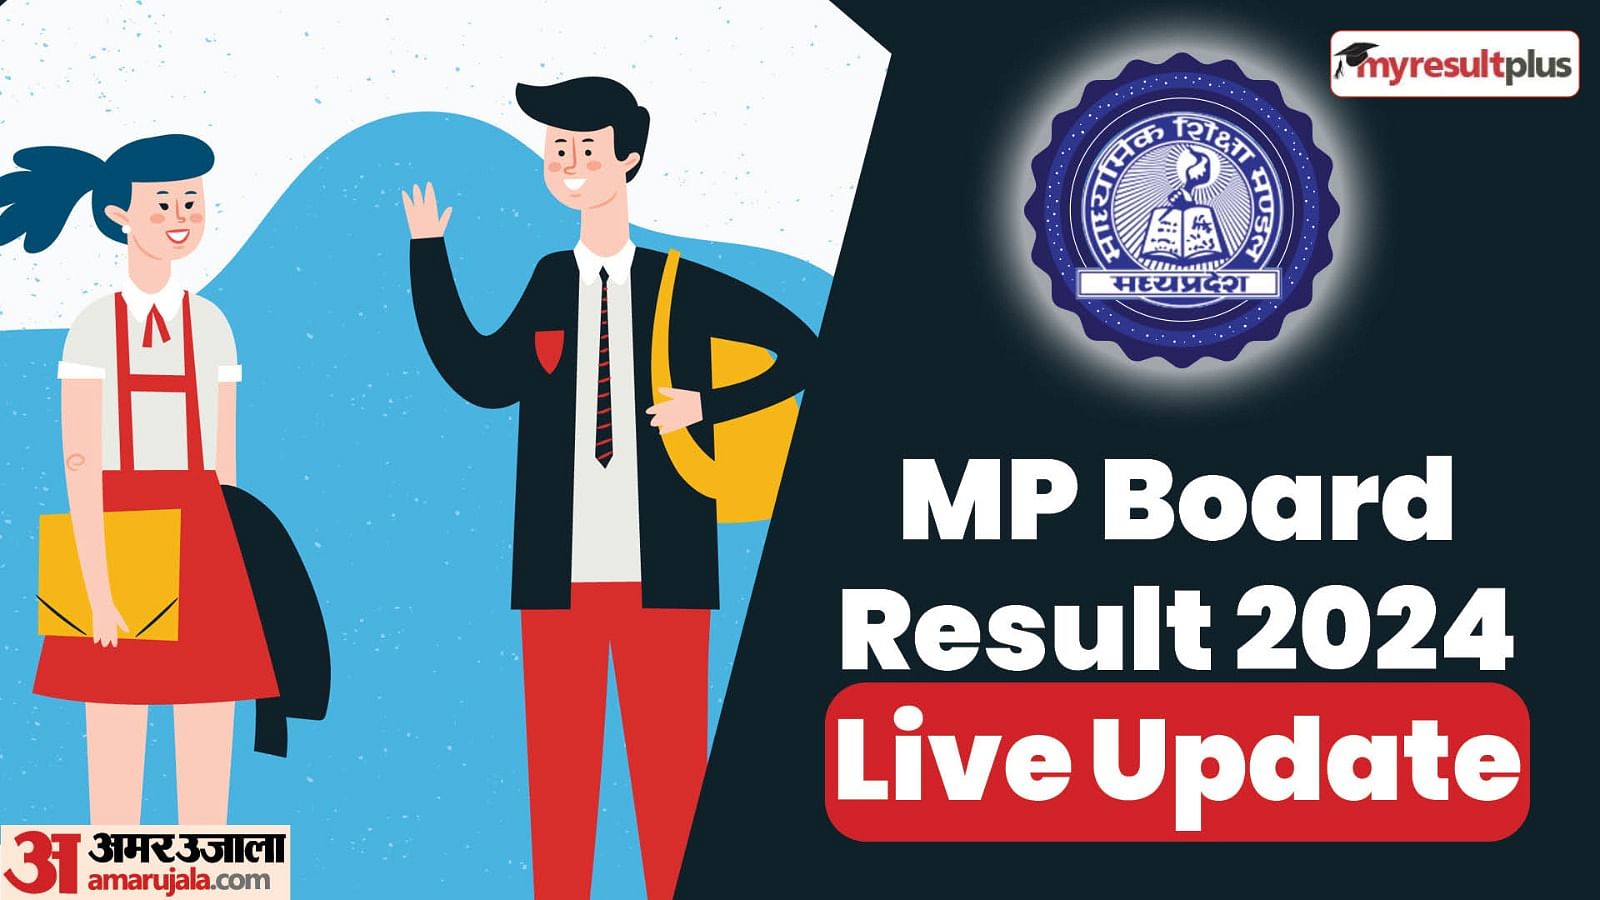 MP Board Result 2024 Live: MPBSE to release the 10th, 12th Board Results tomorrow, Check time here